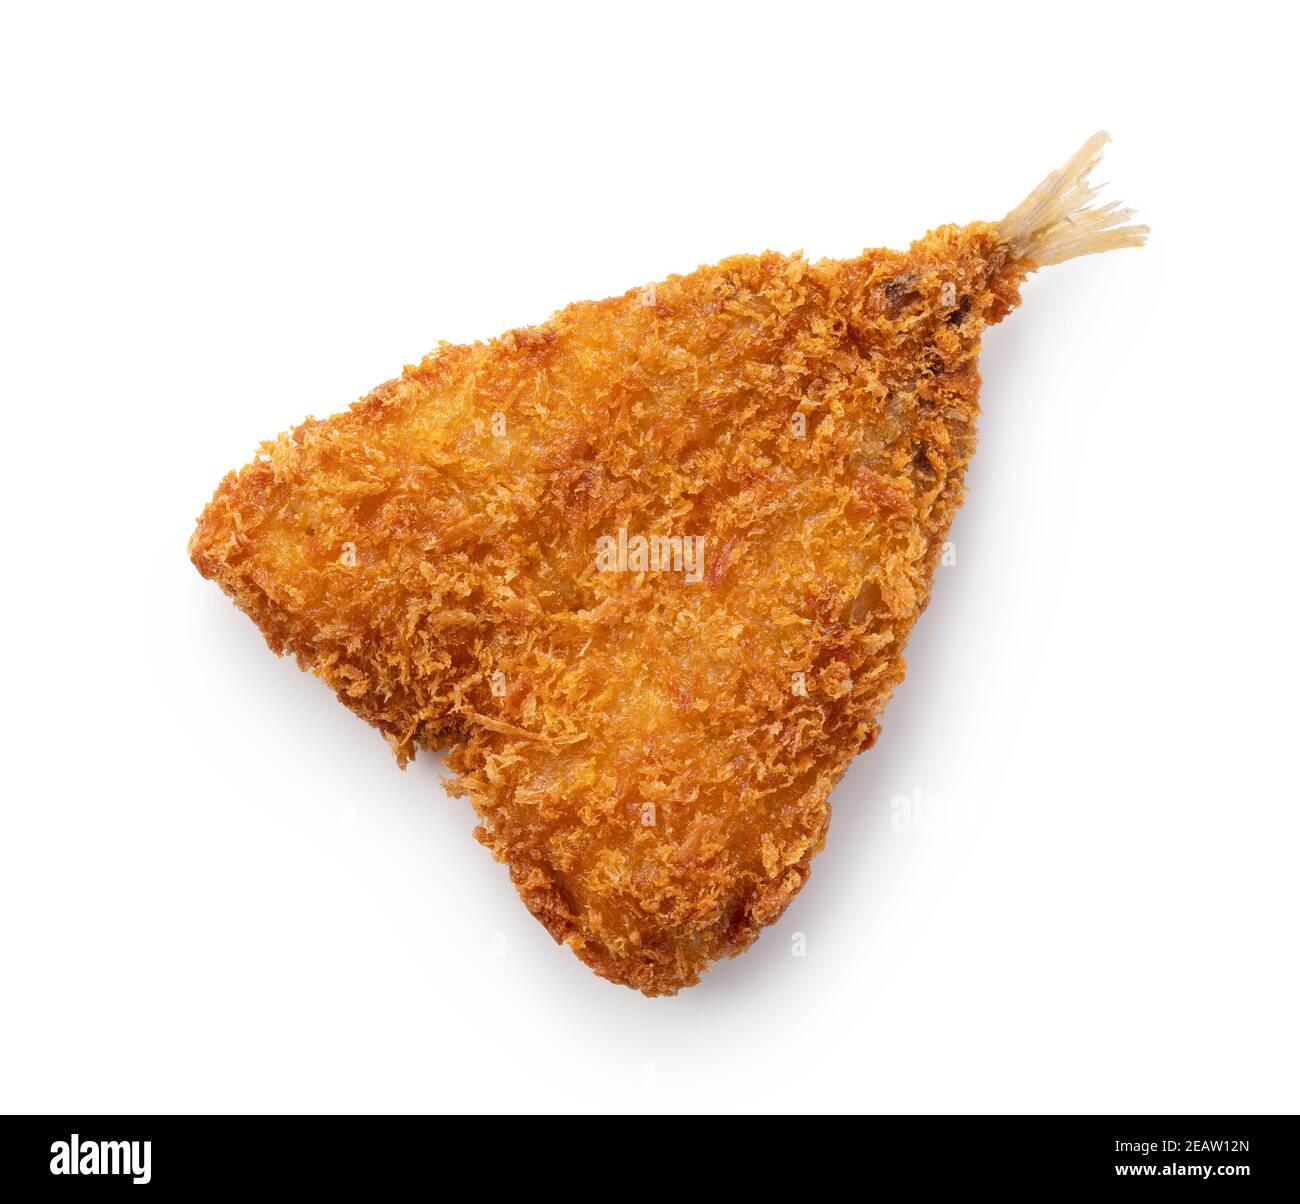 Fried horse mackerel placed on a white background Stock Photo